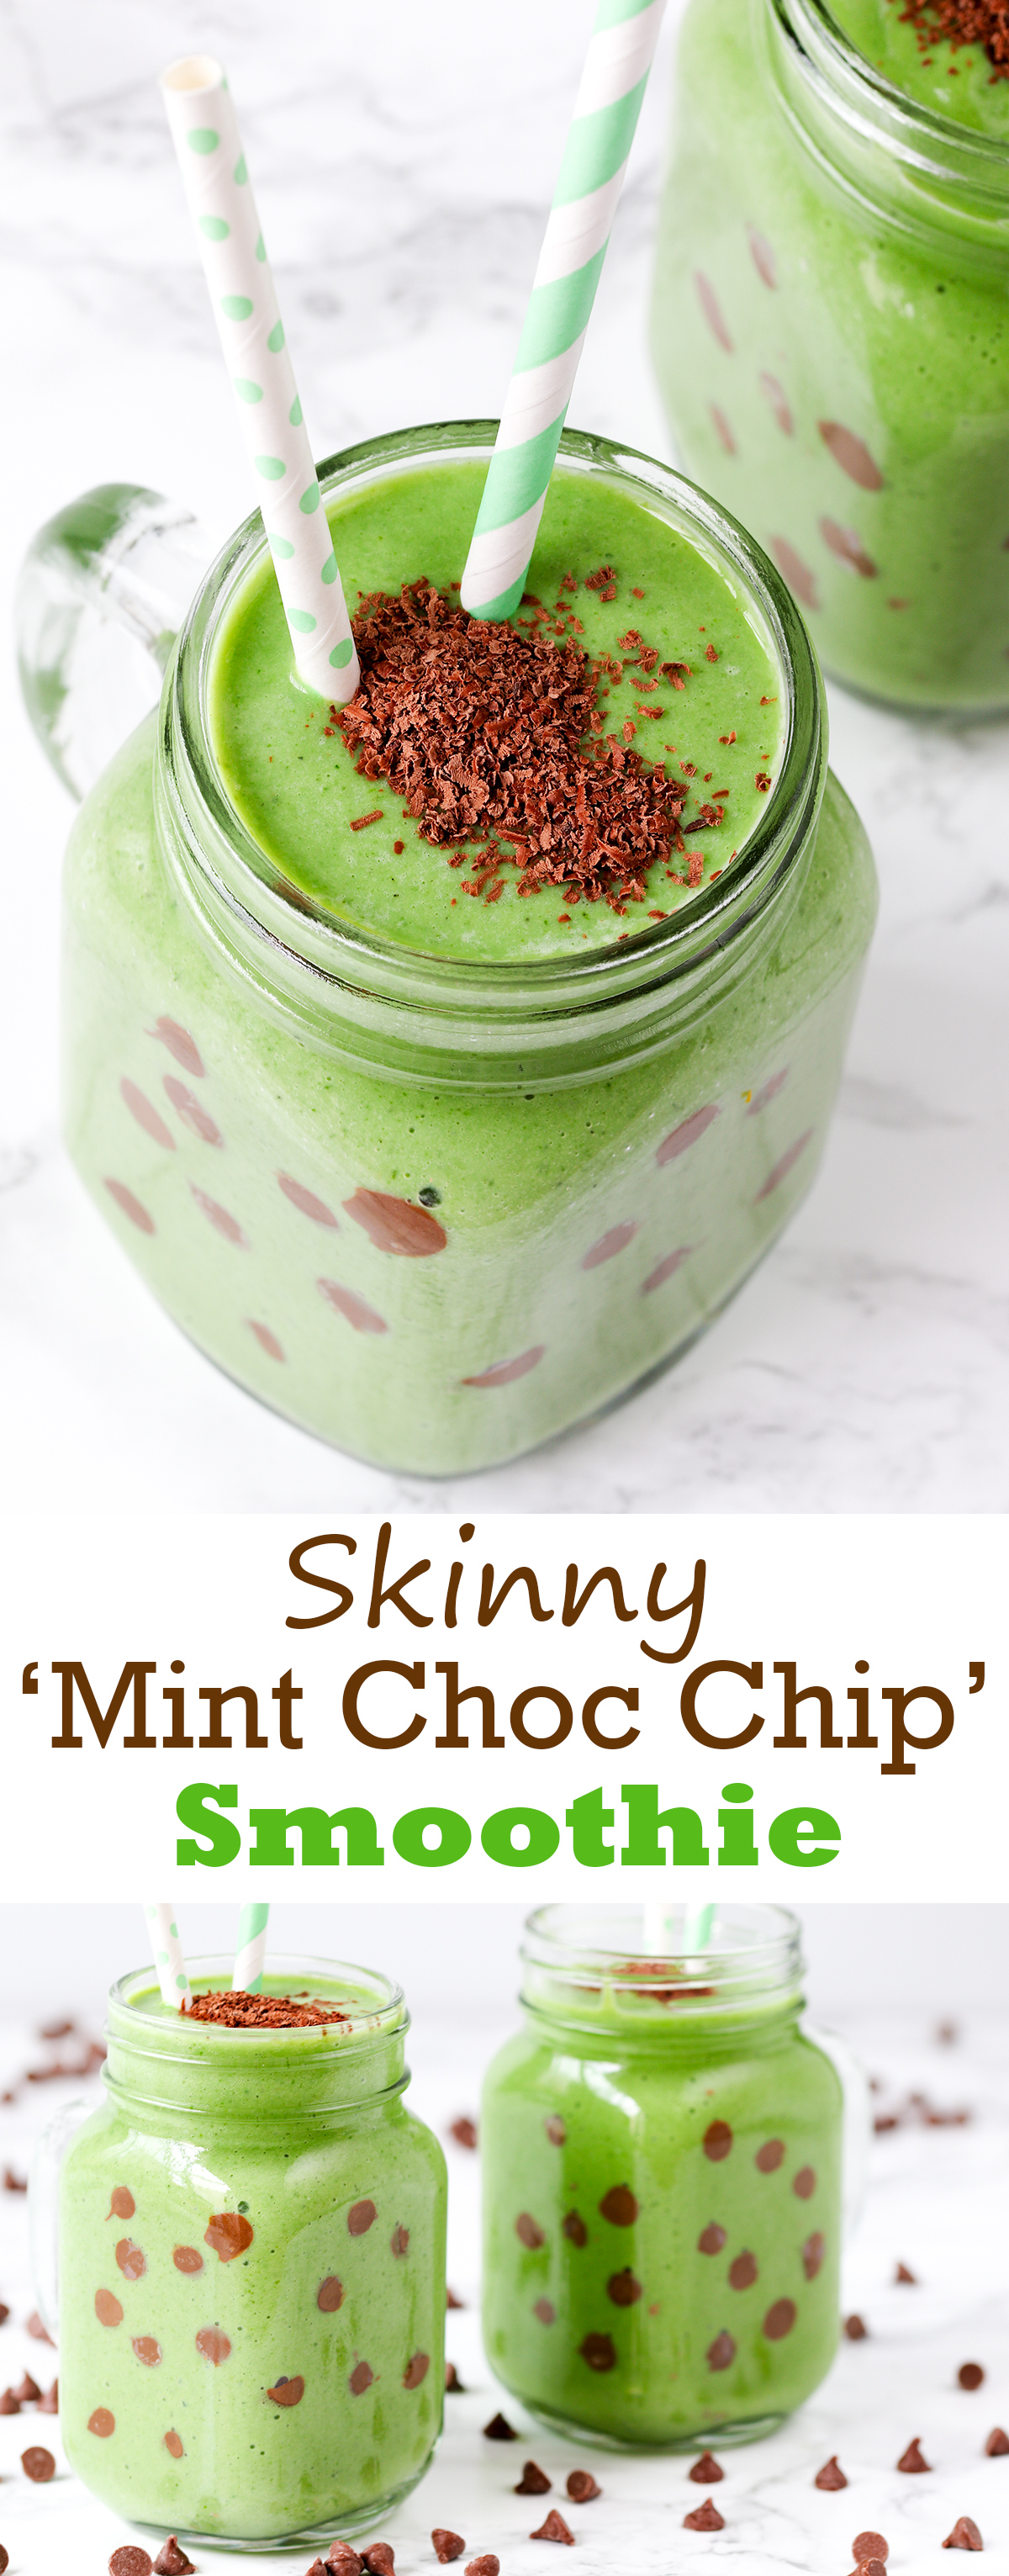 A healthy green smoothie - made even more appealing by adding peppermint and chocolate chips